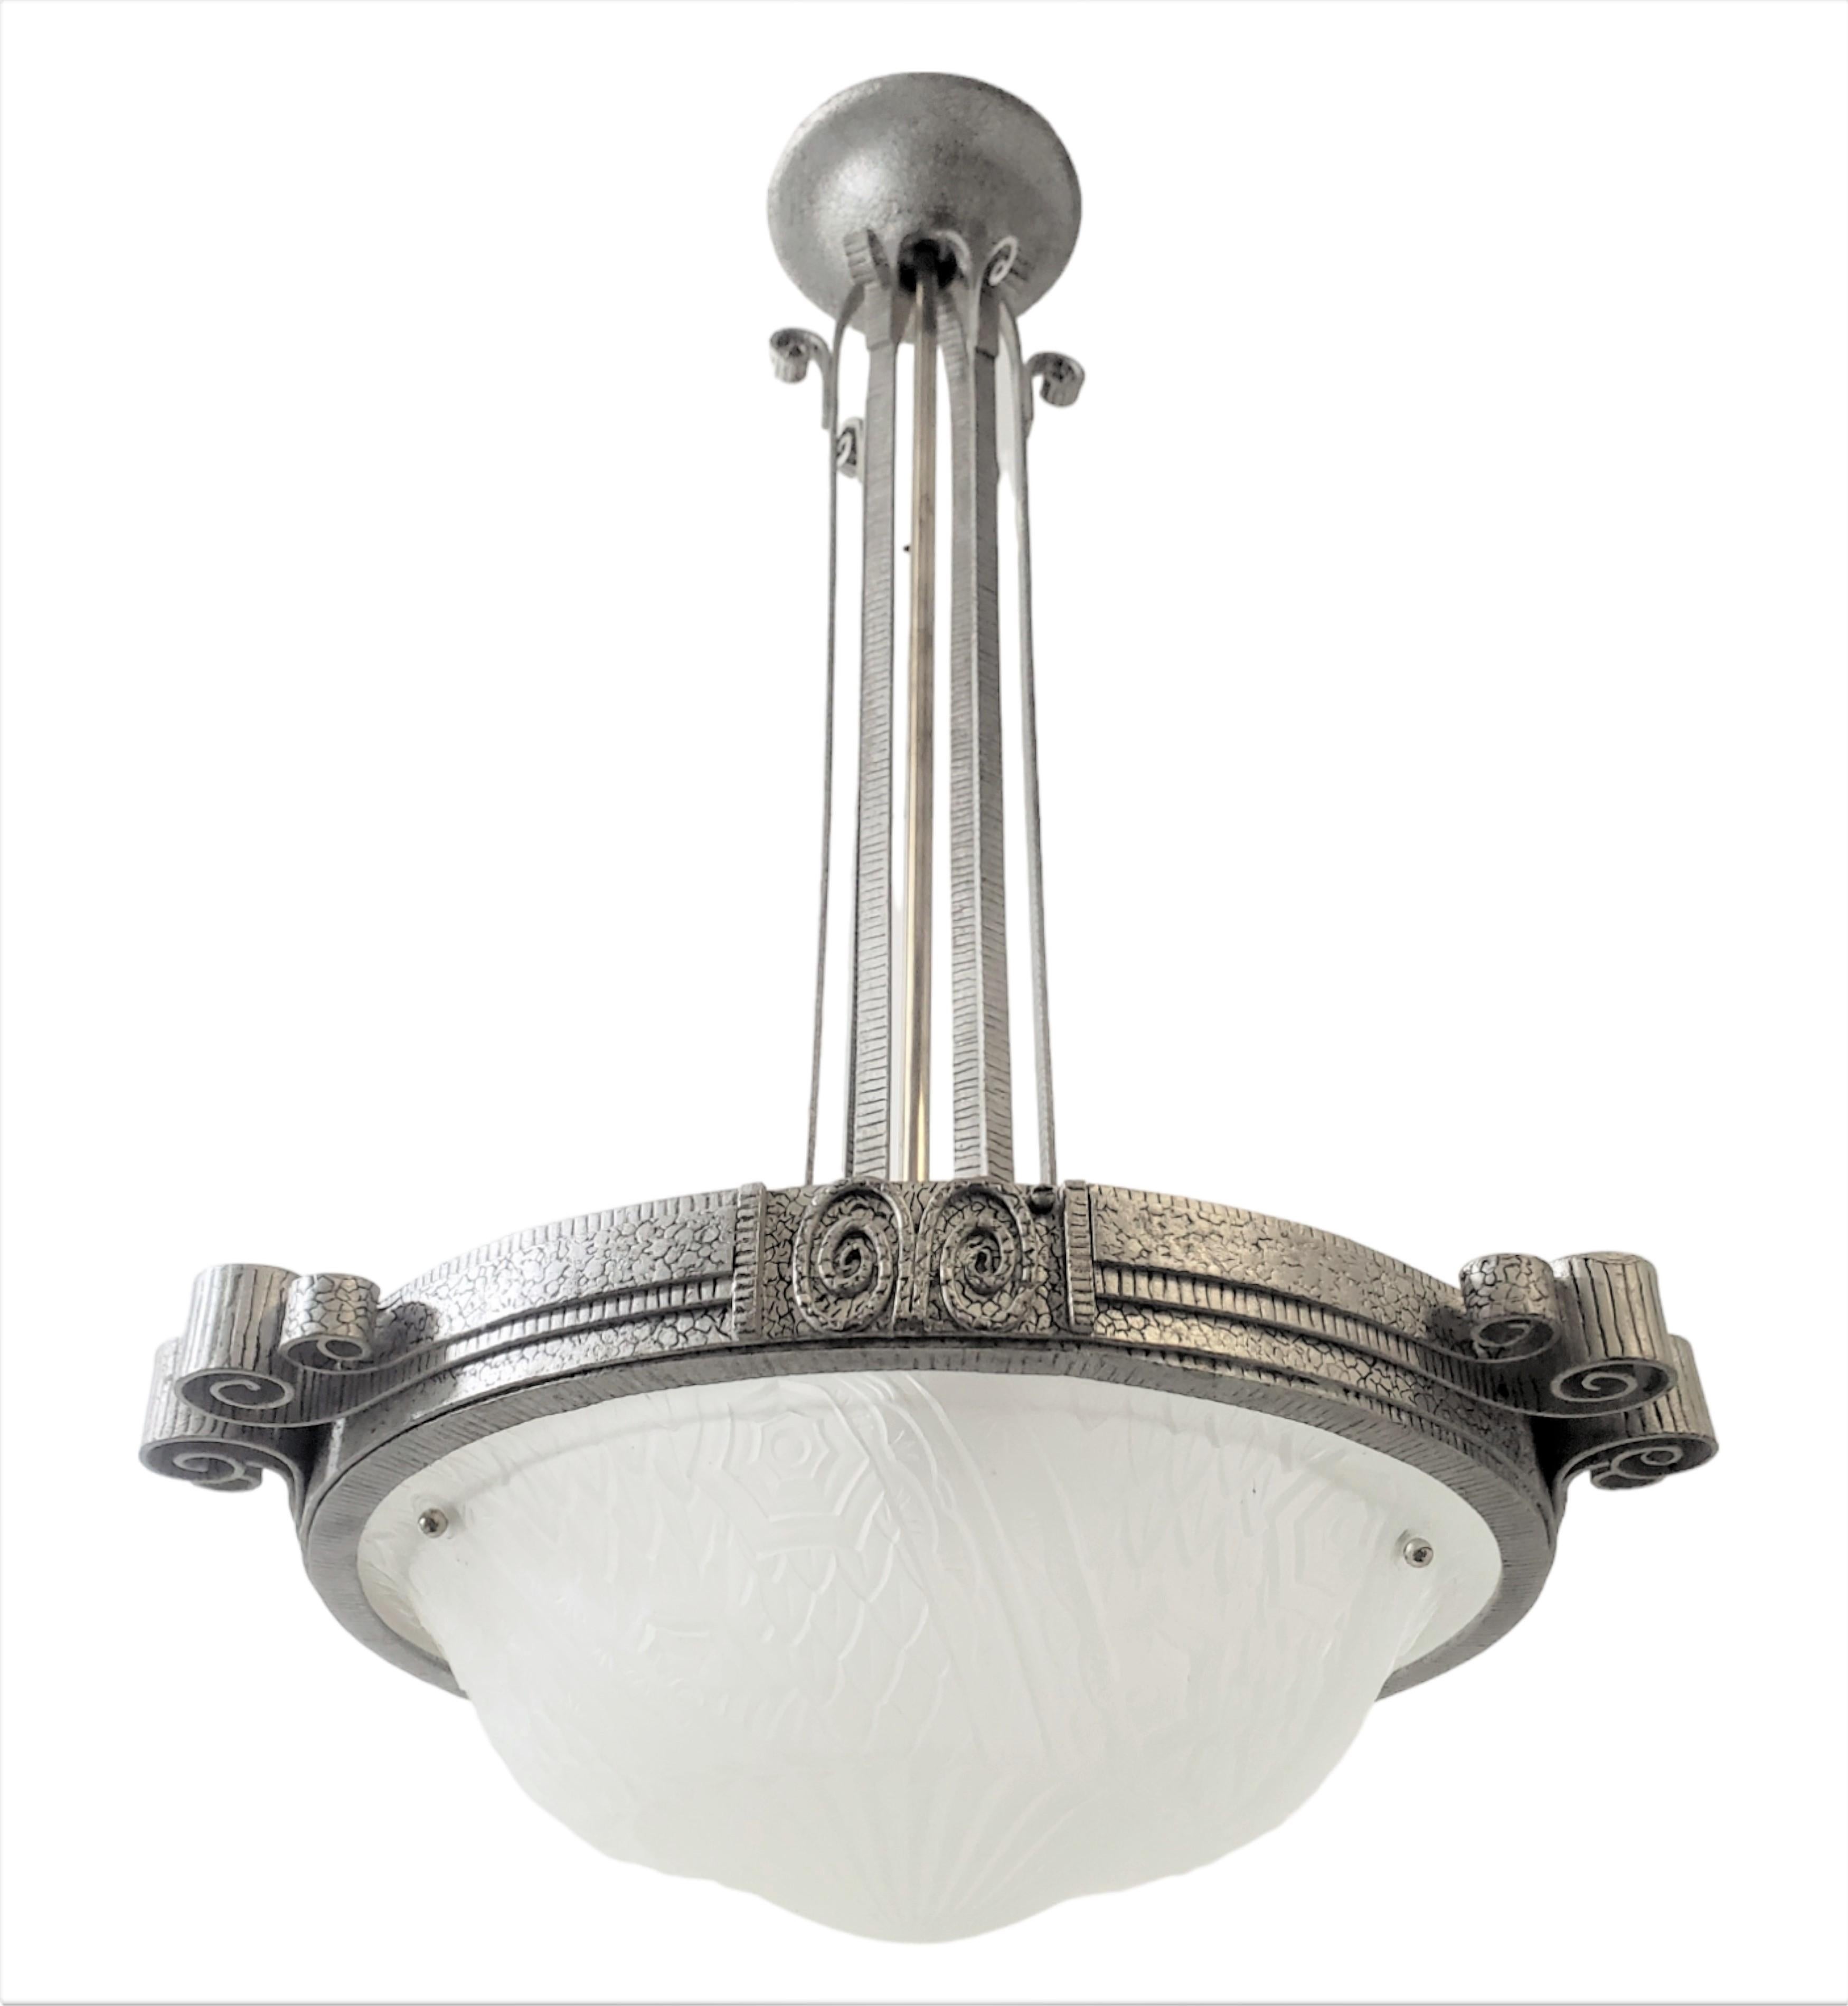 A French Art Deco chandelier, influenced by the Arts and Crafts style, features hand-hammered iron craftsmanship and a sizable frosted glass geometric central coupe. The broad hammered iron surround is adorned with three evenly spaced protruding